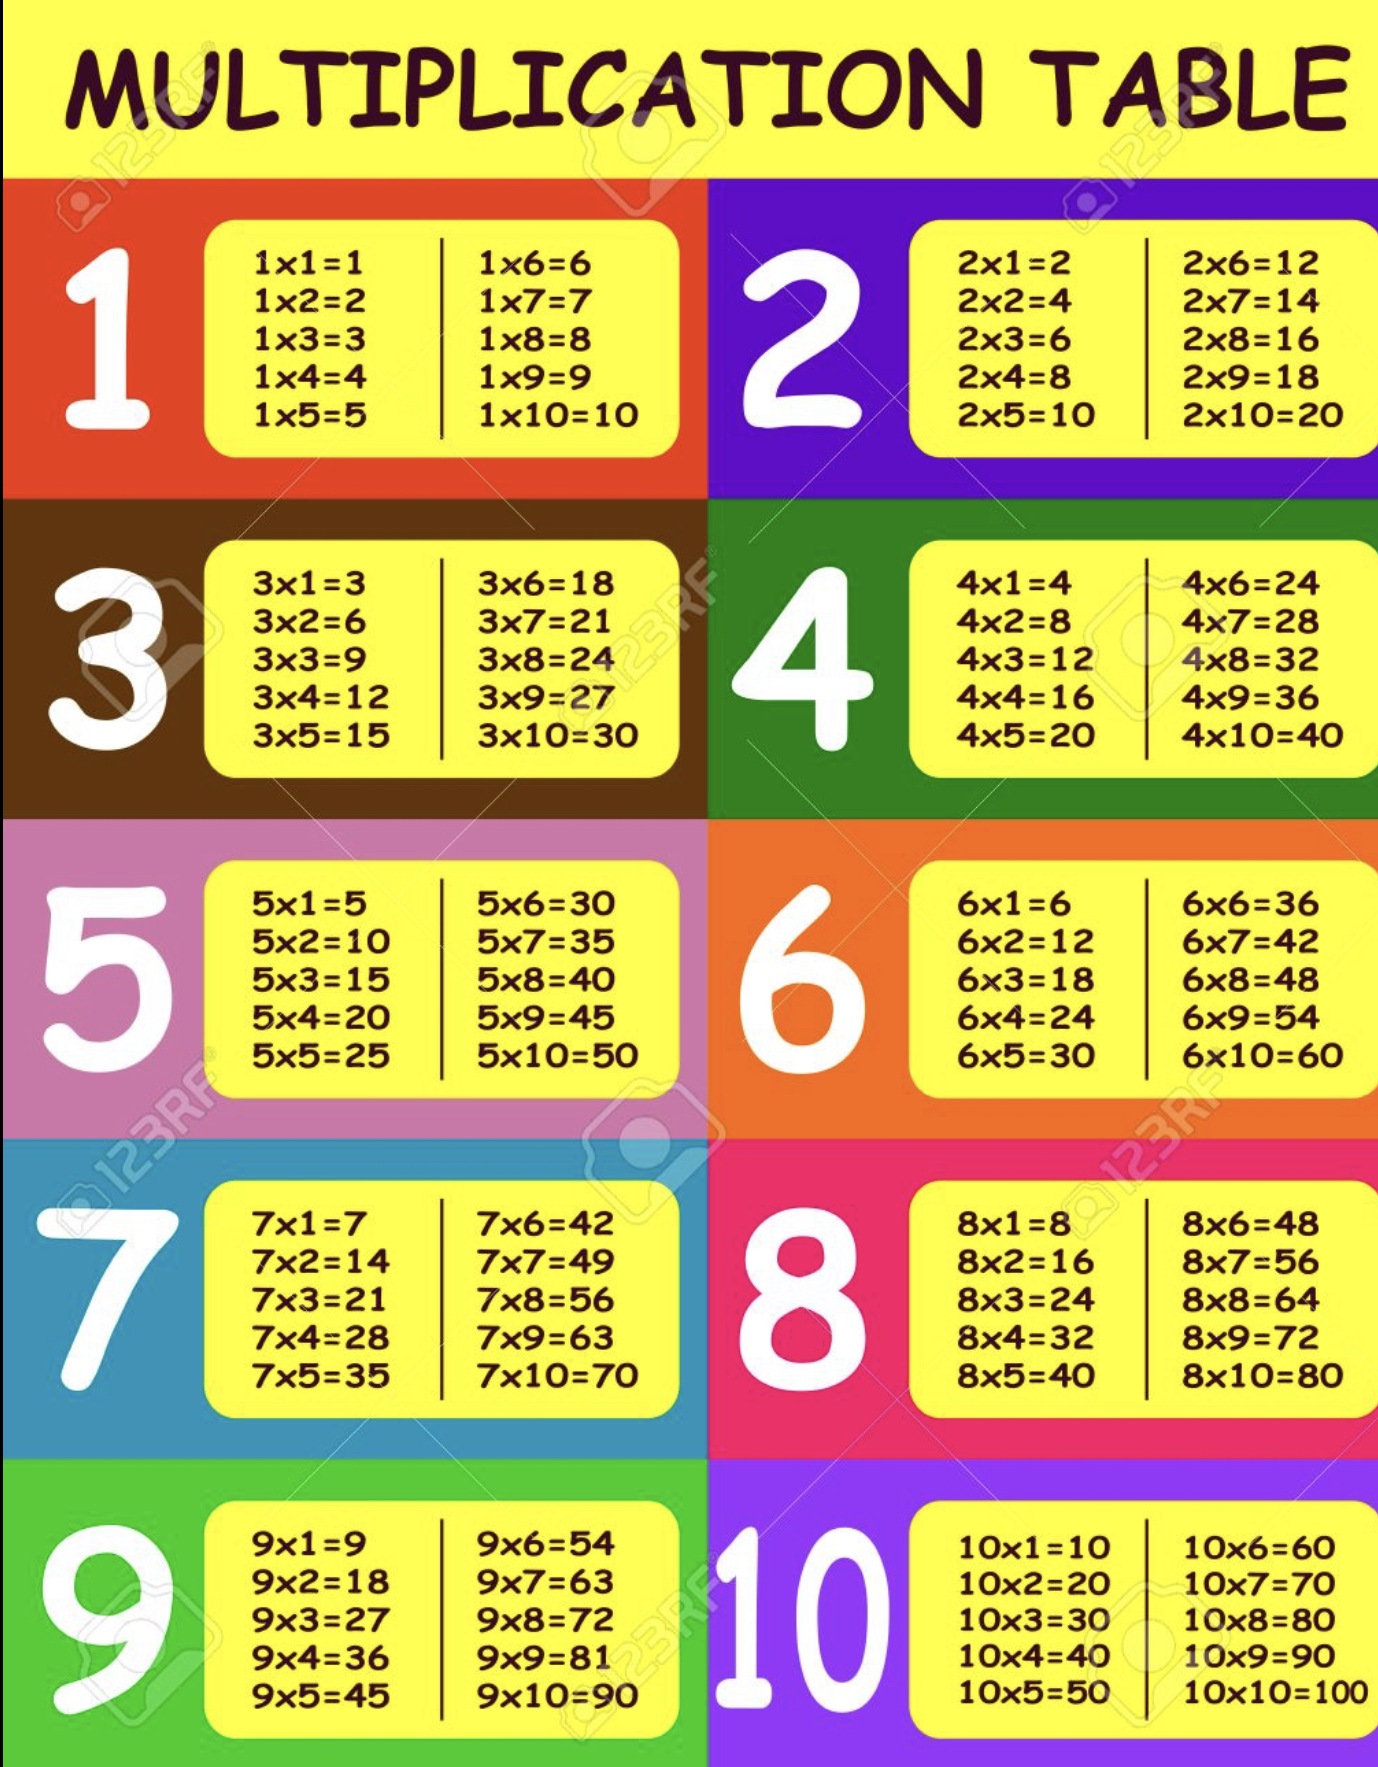 multiplication-word-problems-966-plays-quizizz